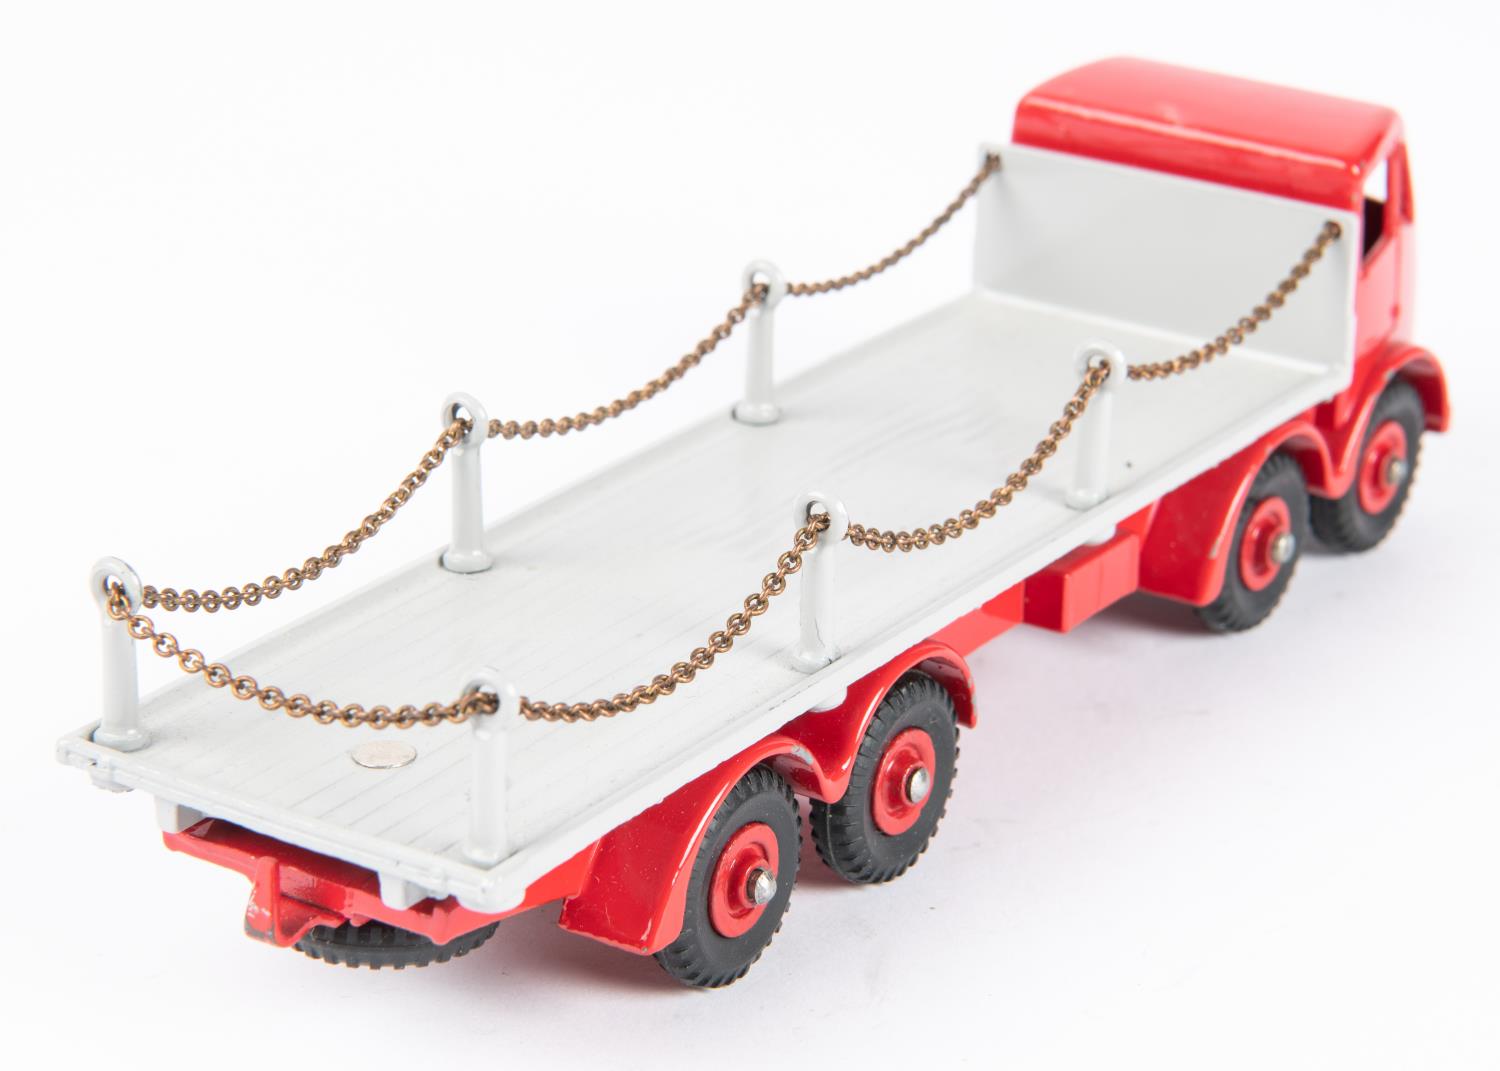 Dinky Toys Foden Flat Truck with Chains (905). Red cab and chassis, grey body, red wheels. Boxed, - Image 2 of 3